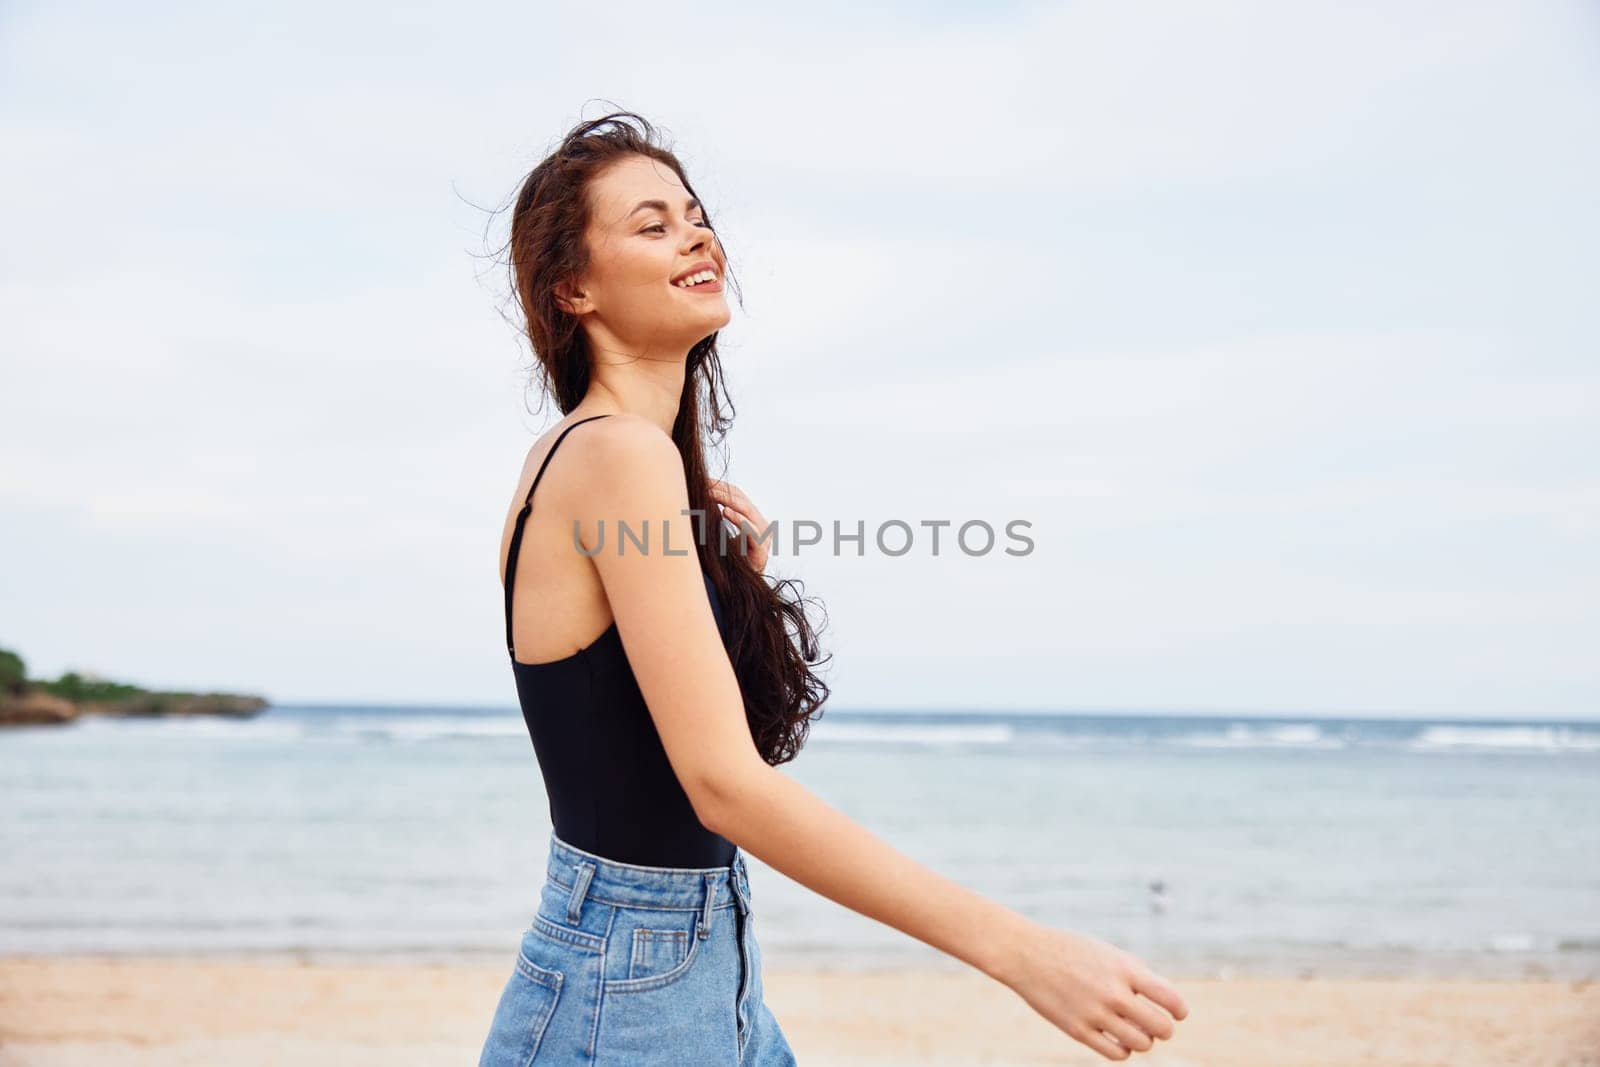 sand woman ocean nature running beach young freedom travel tropical smile adult vacation coast sea happiness summer enjoyment copy sunset leisure space